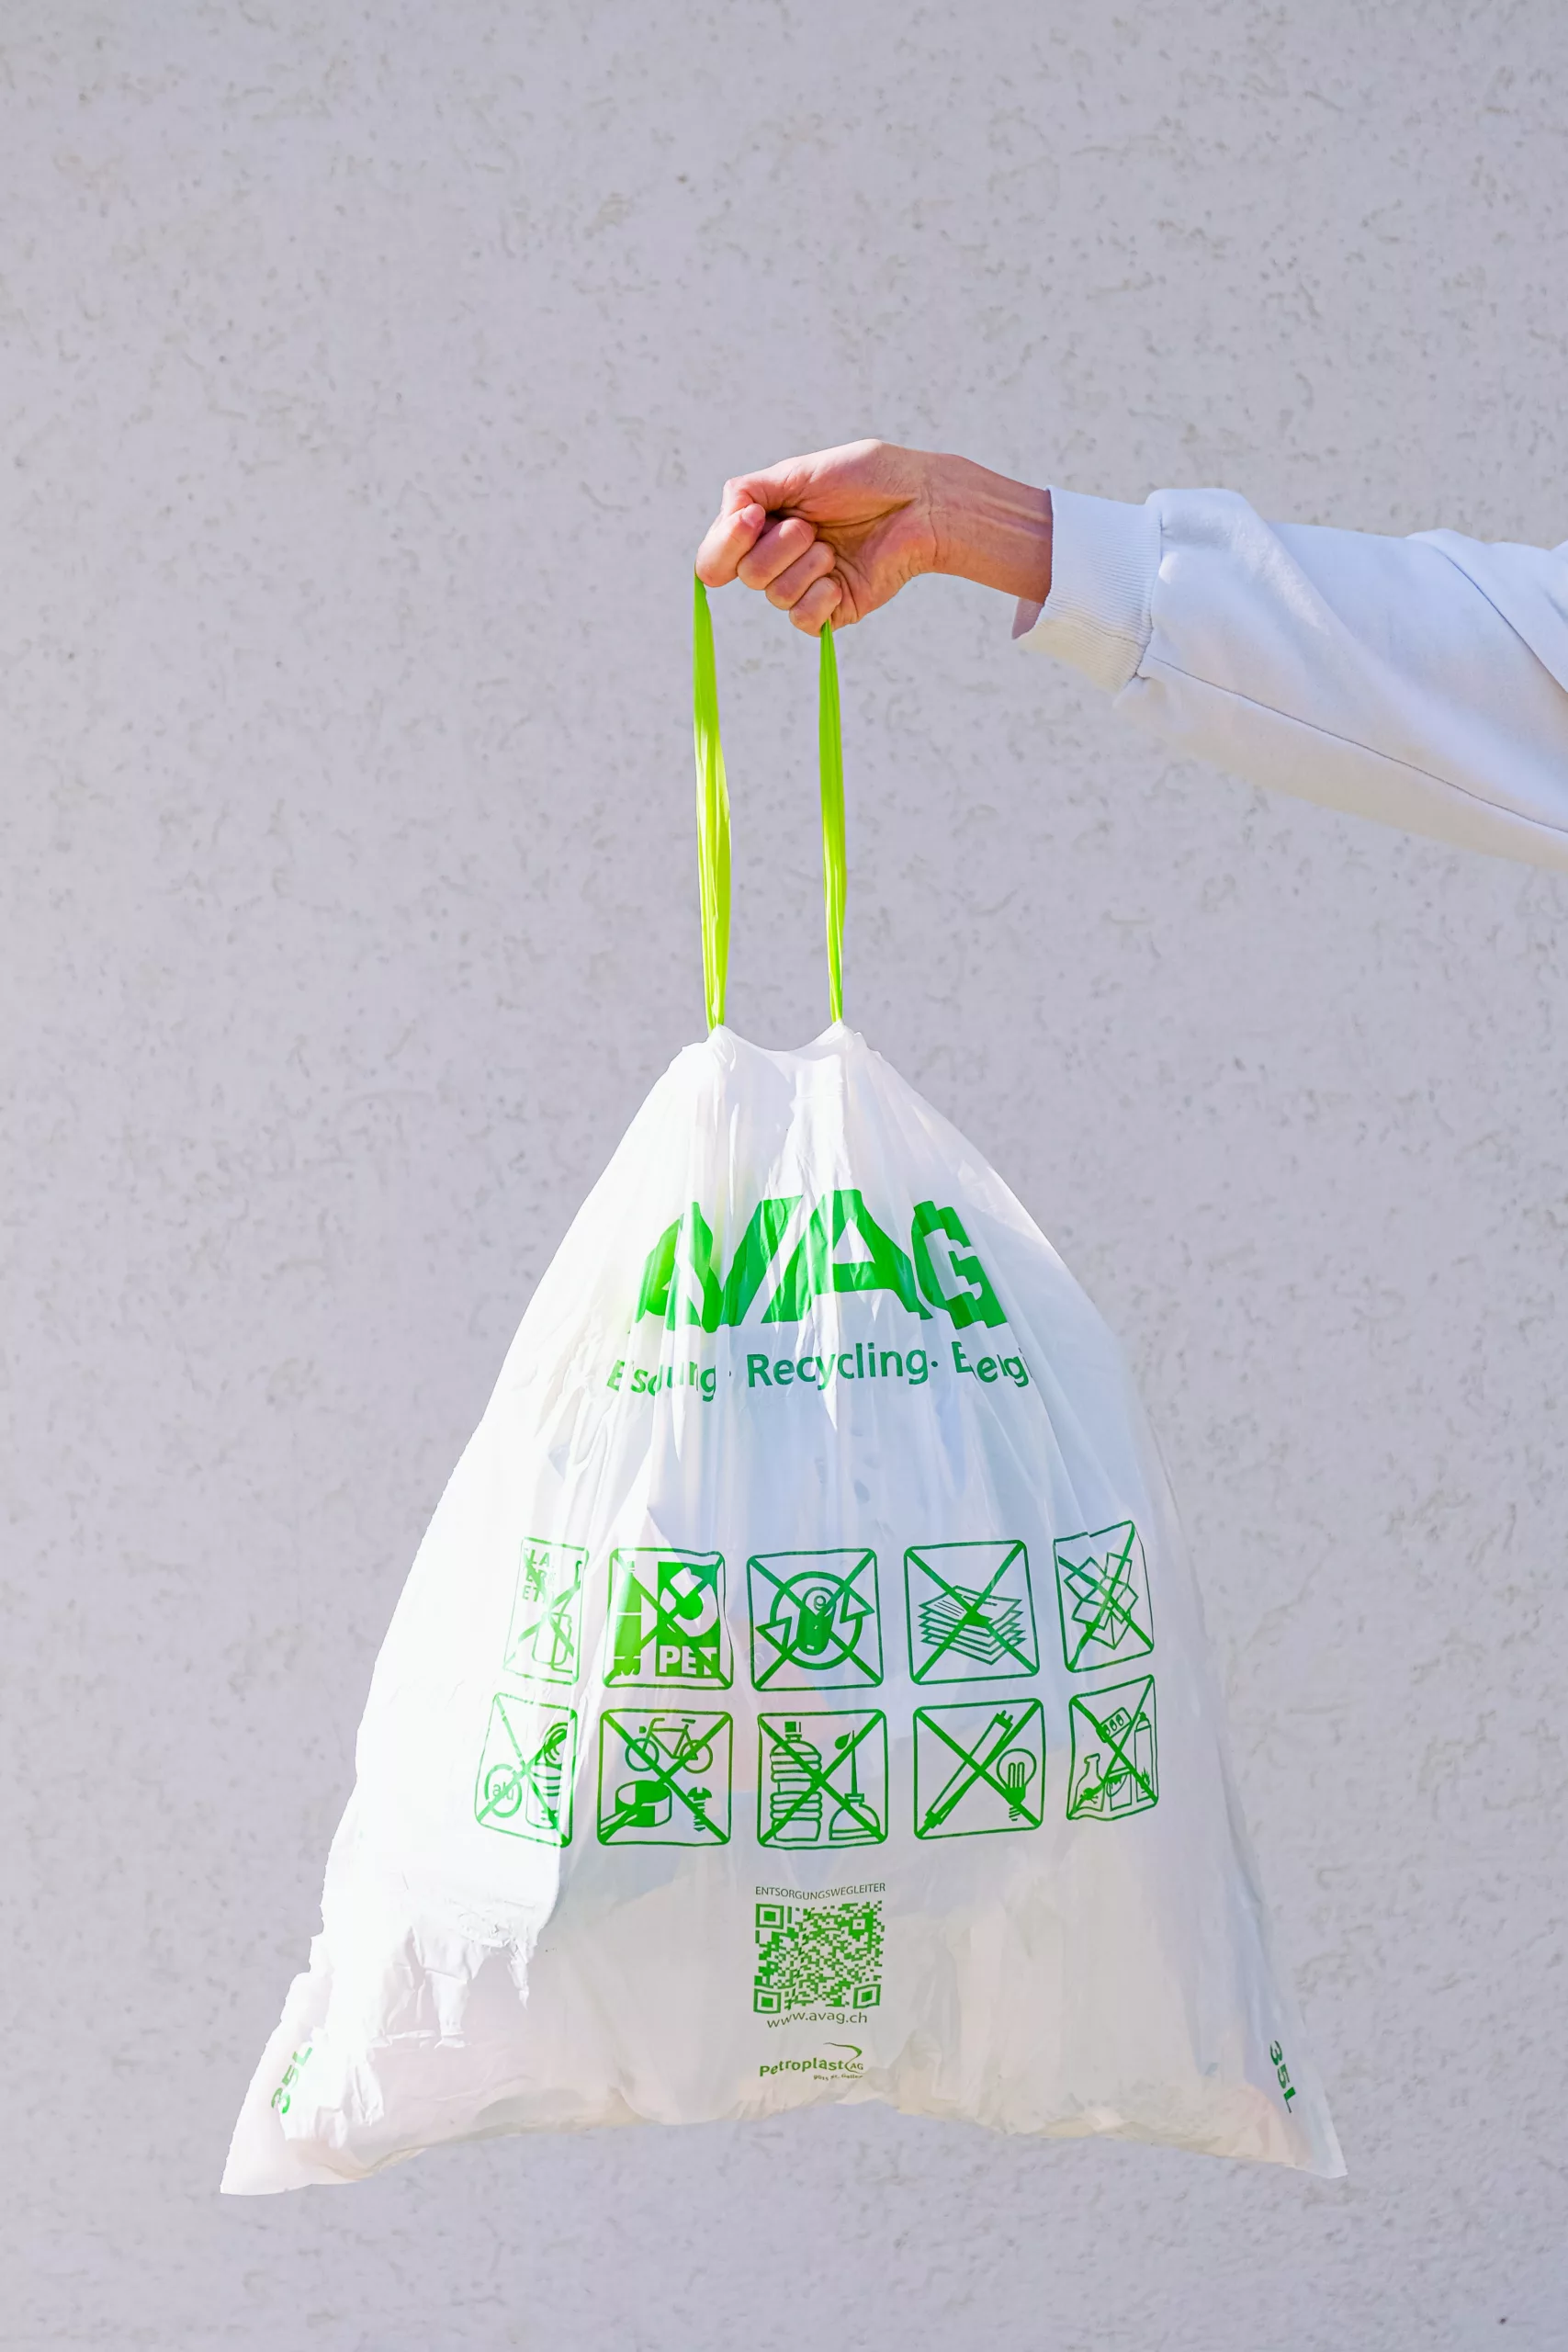 Top 9 Certified Compostable Garbage Bags for a Greener Home